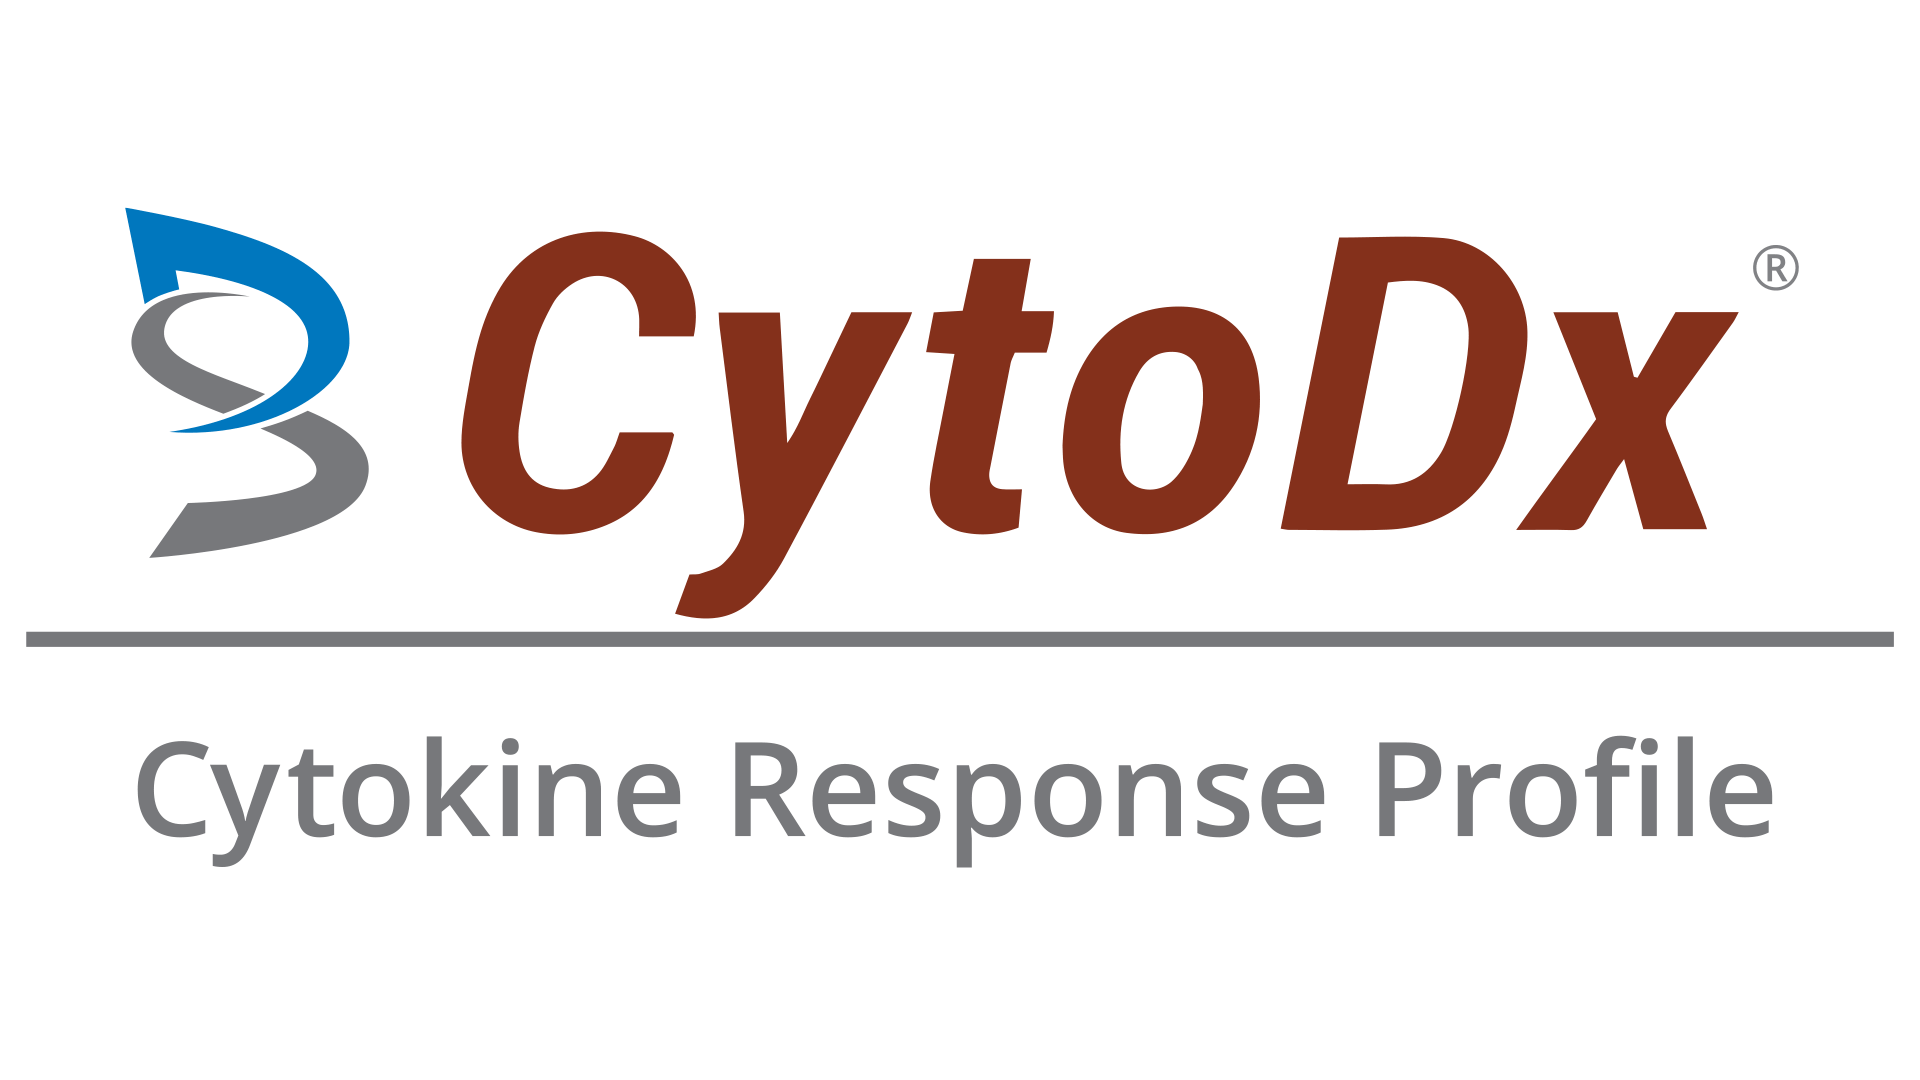 Learn More About CytoDx